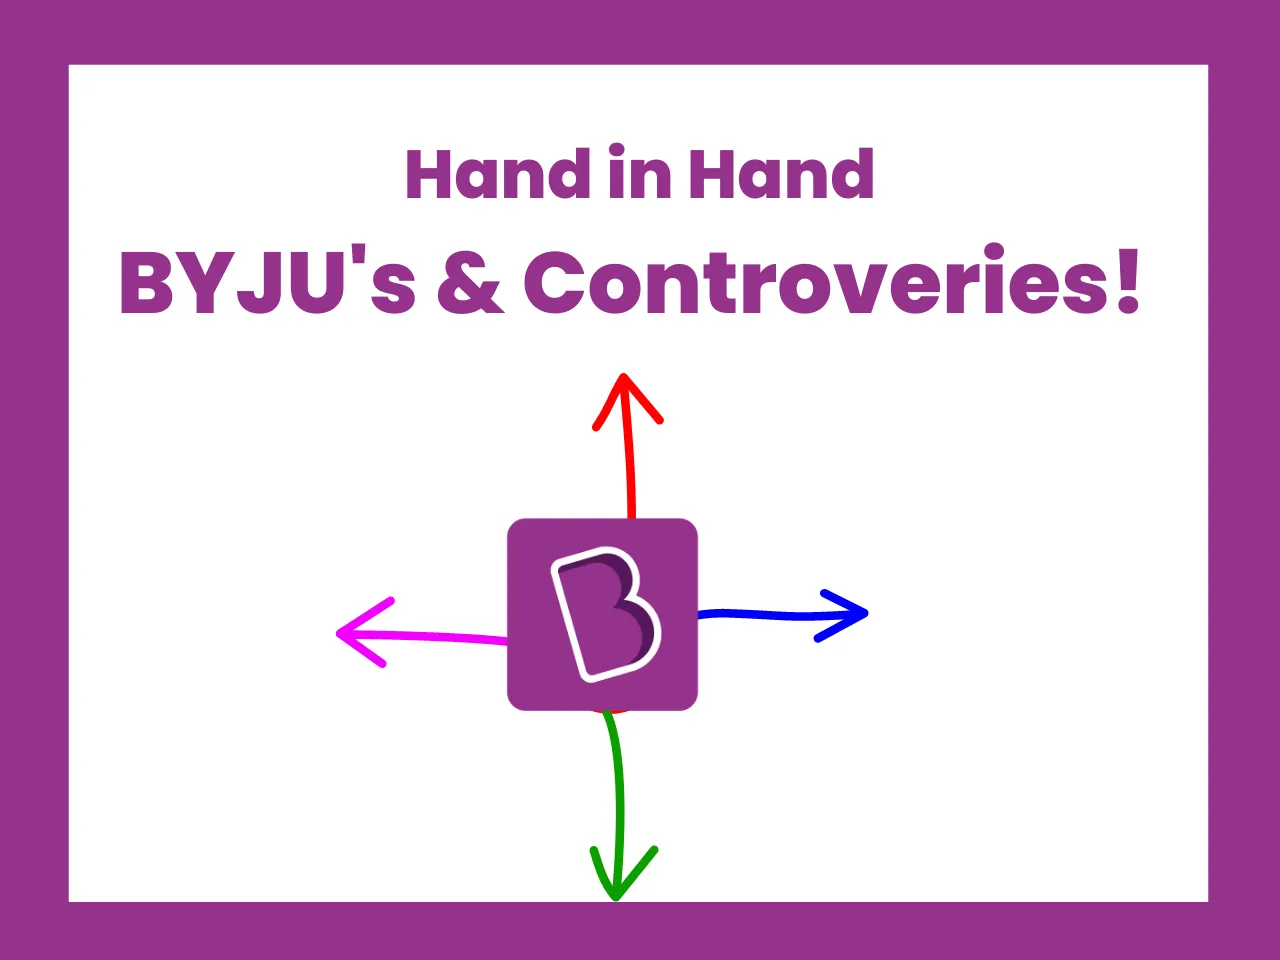 Byju's: Controversies that have stalked the leading tech platform